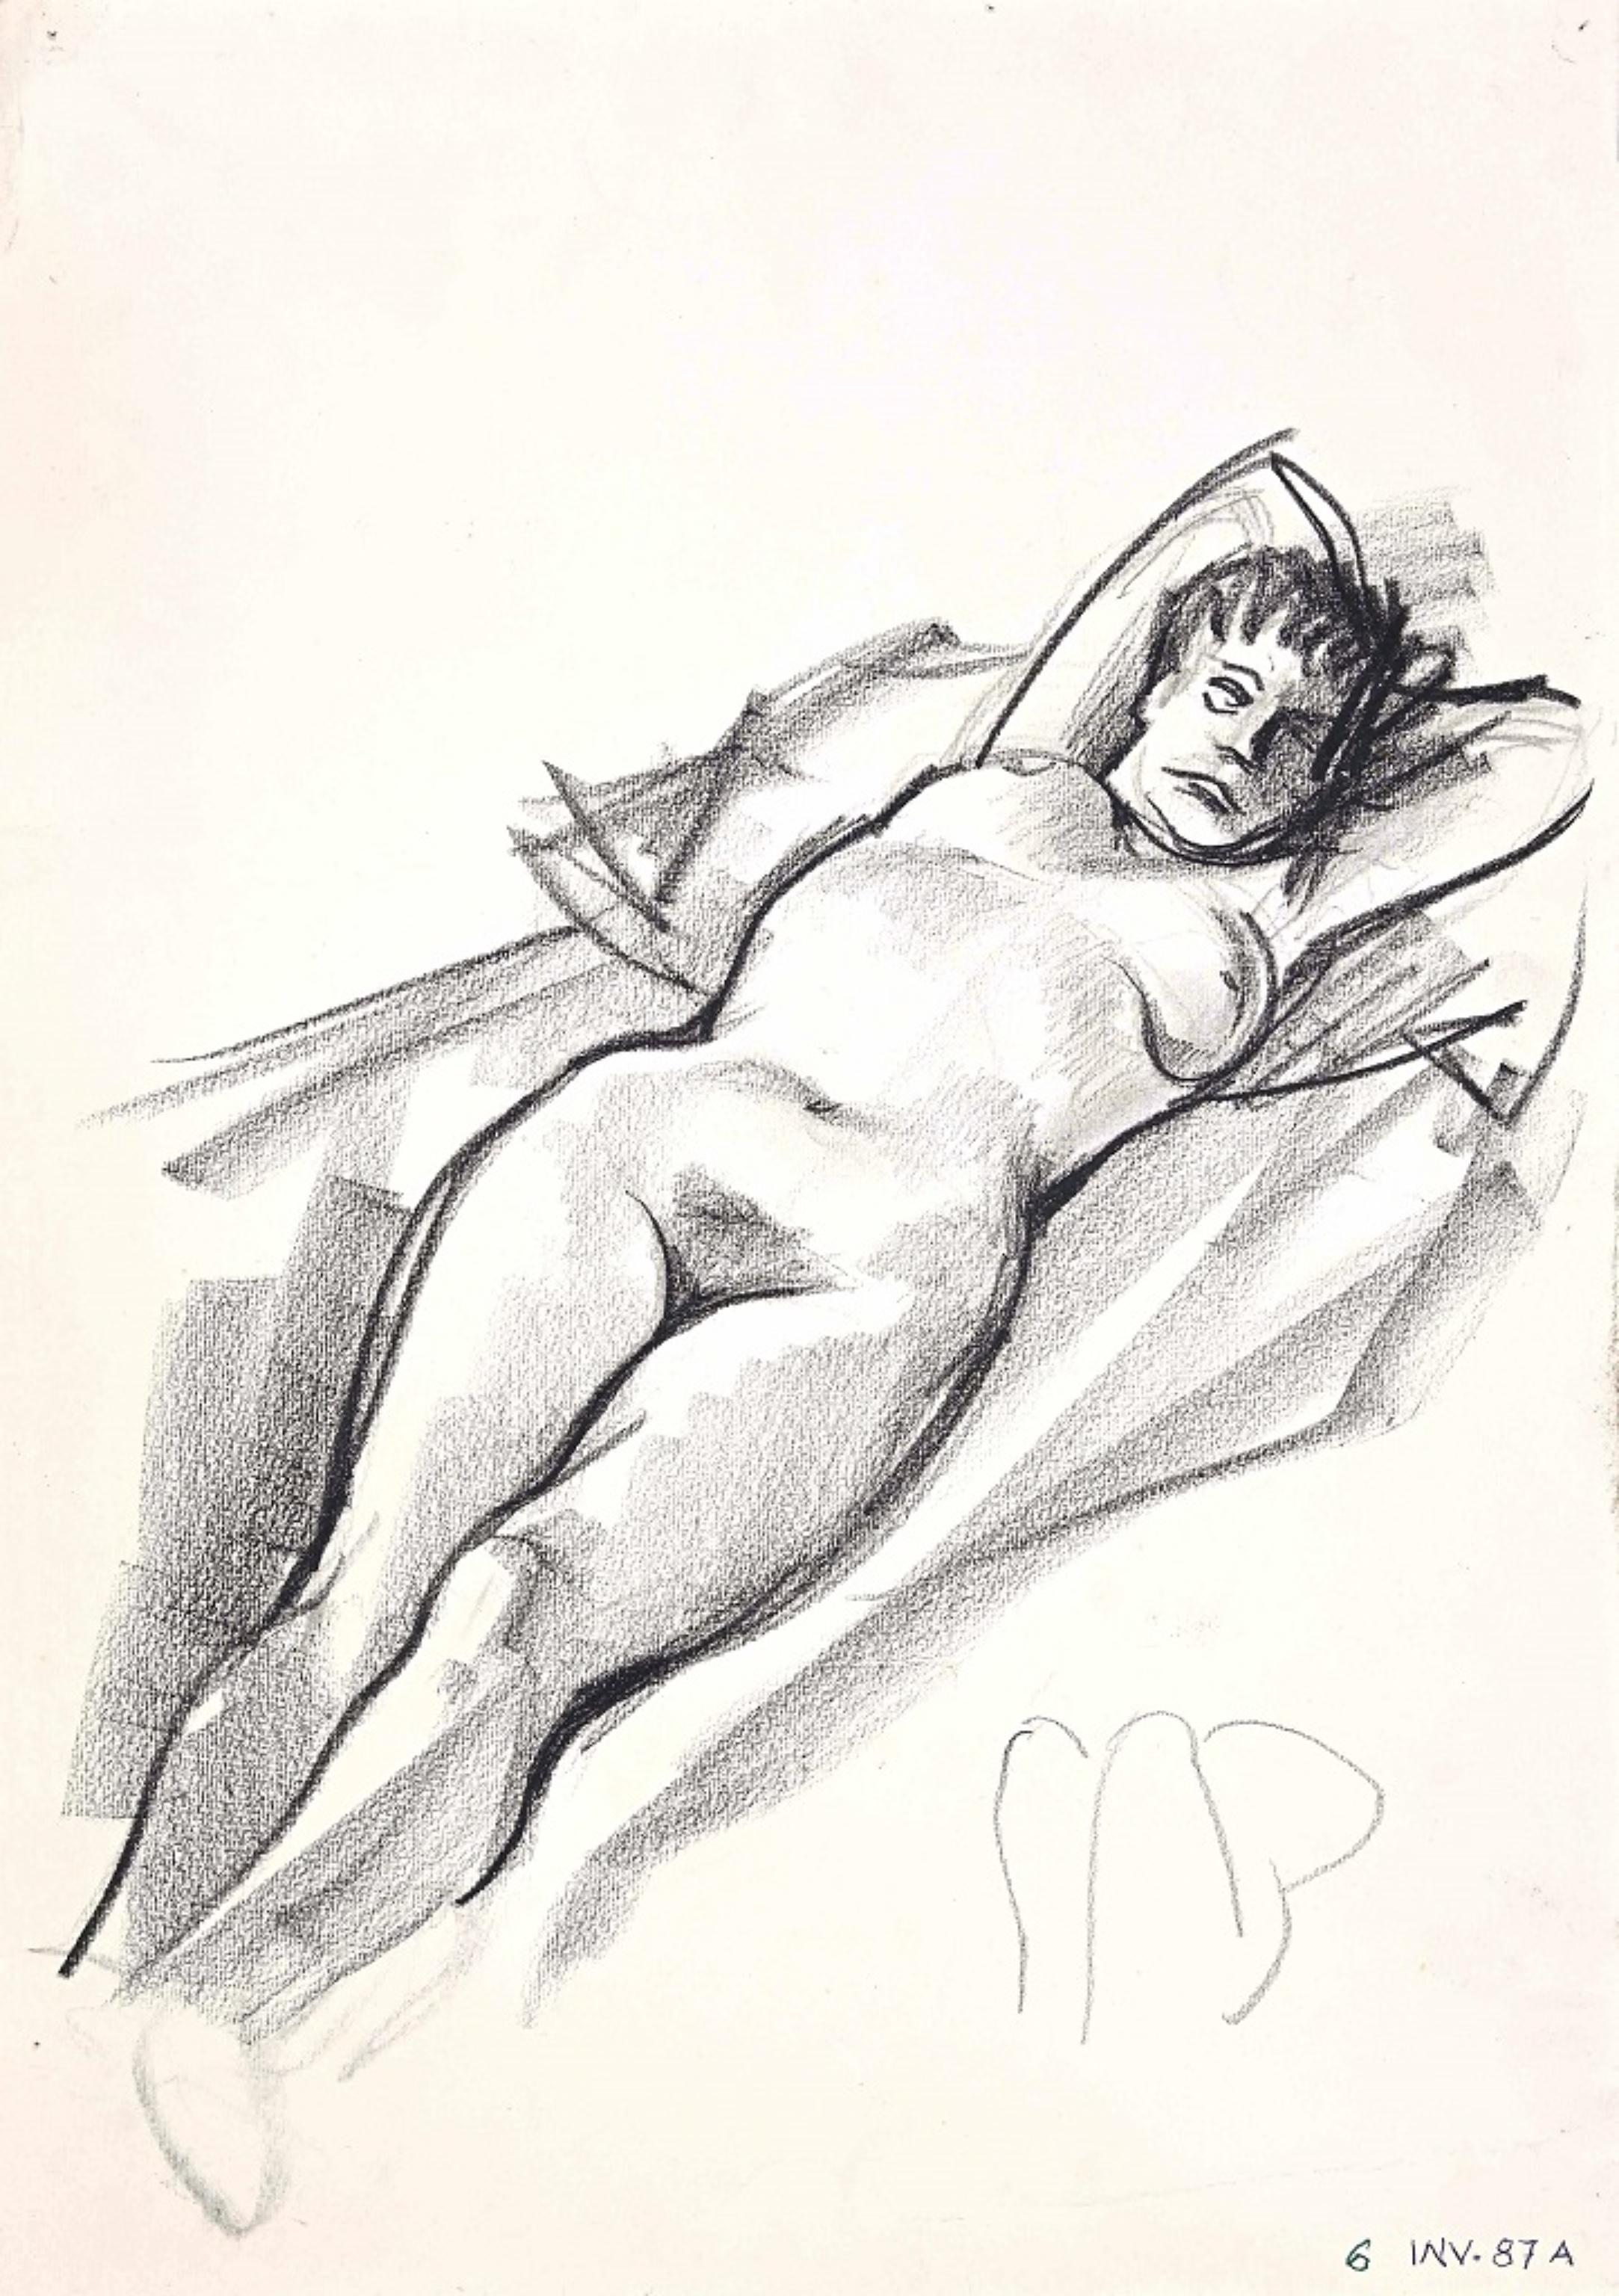 Female Nude - Charcoal Drawing - 1970s